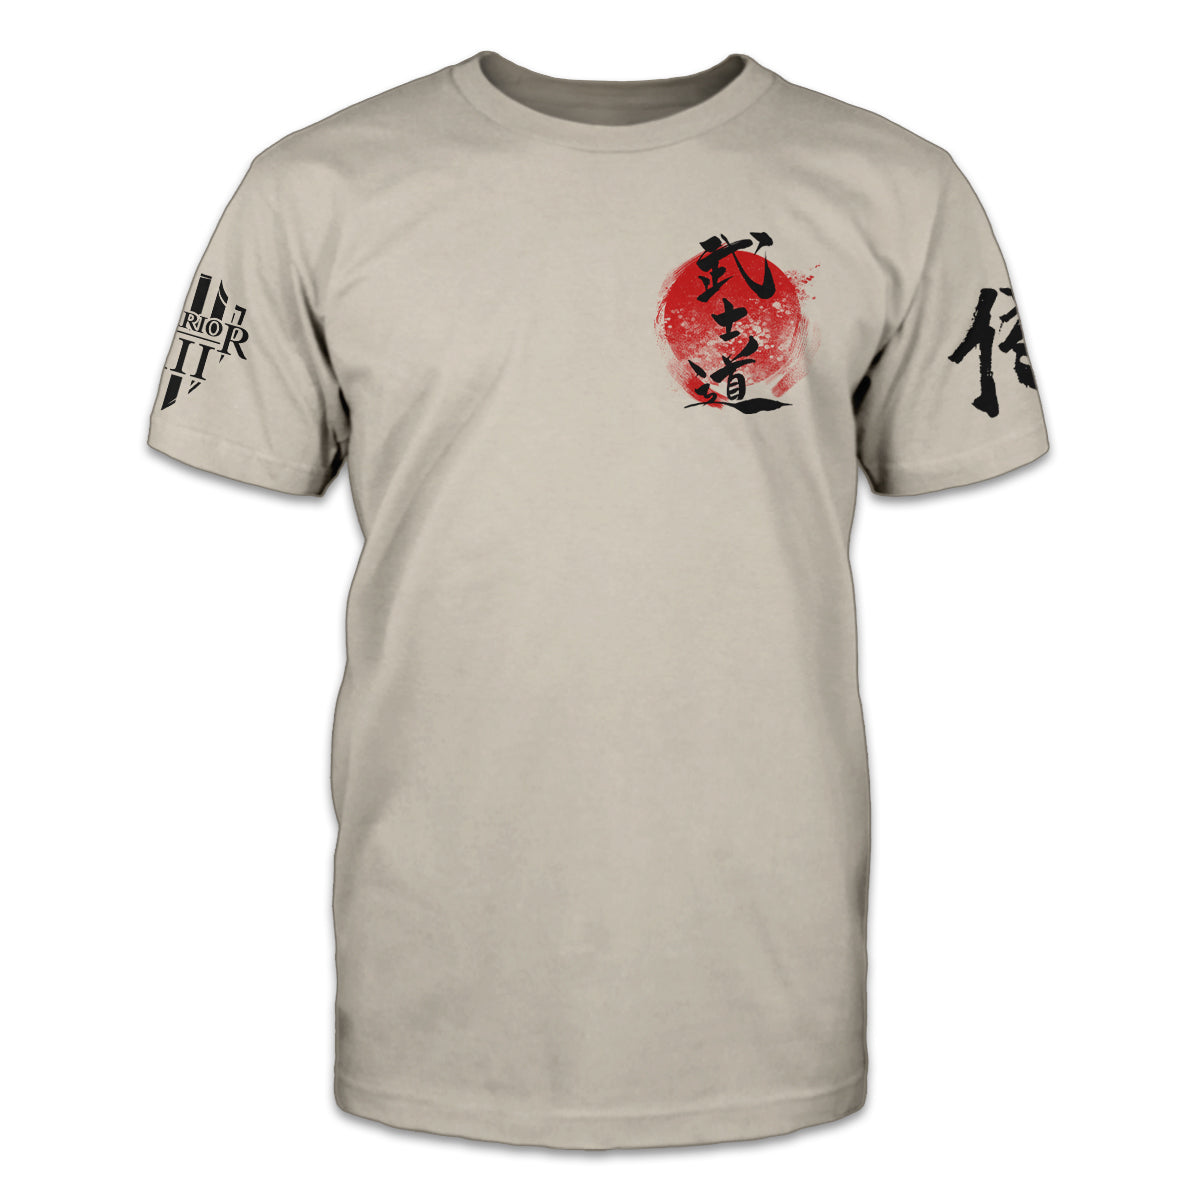 Samurai code is printed on the front of this light tan t-shirt.